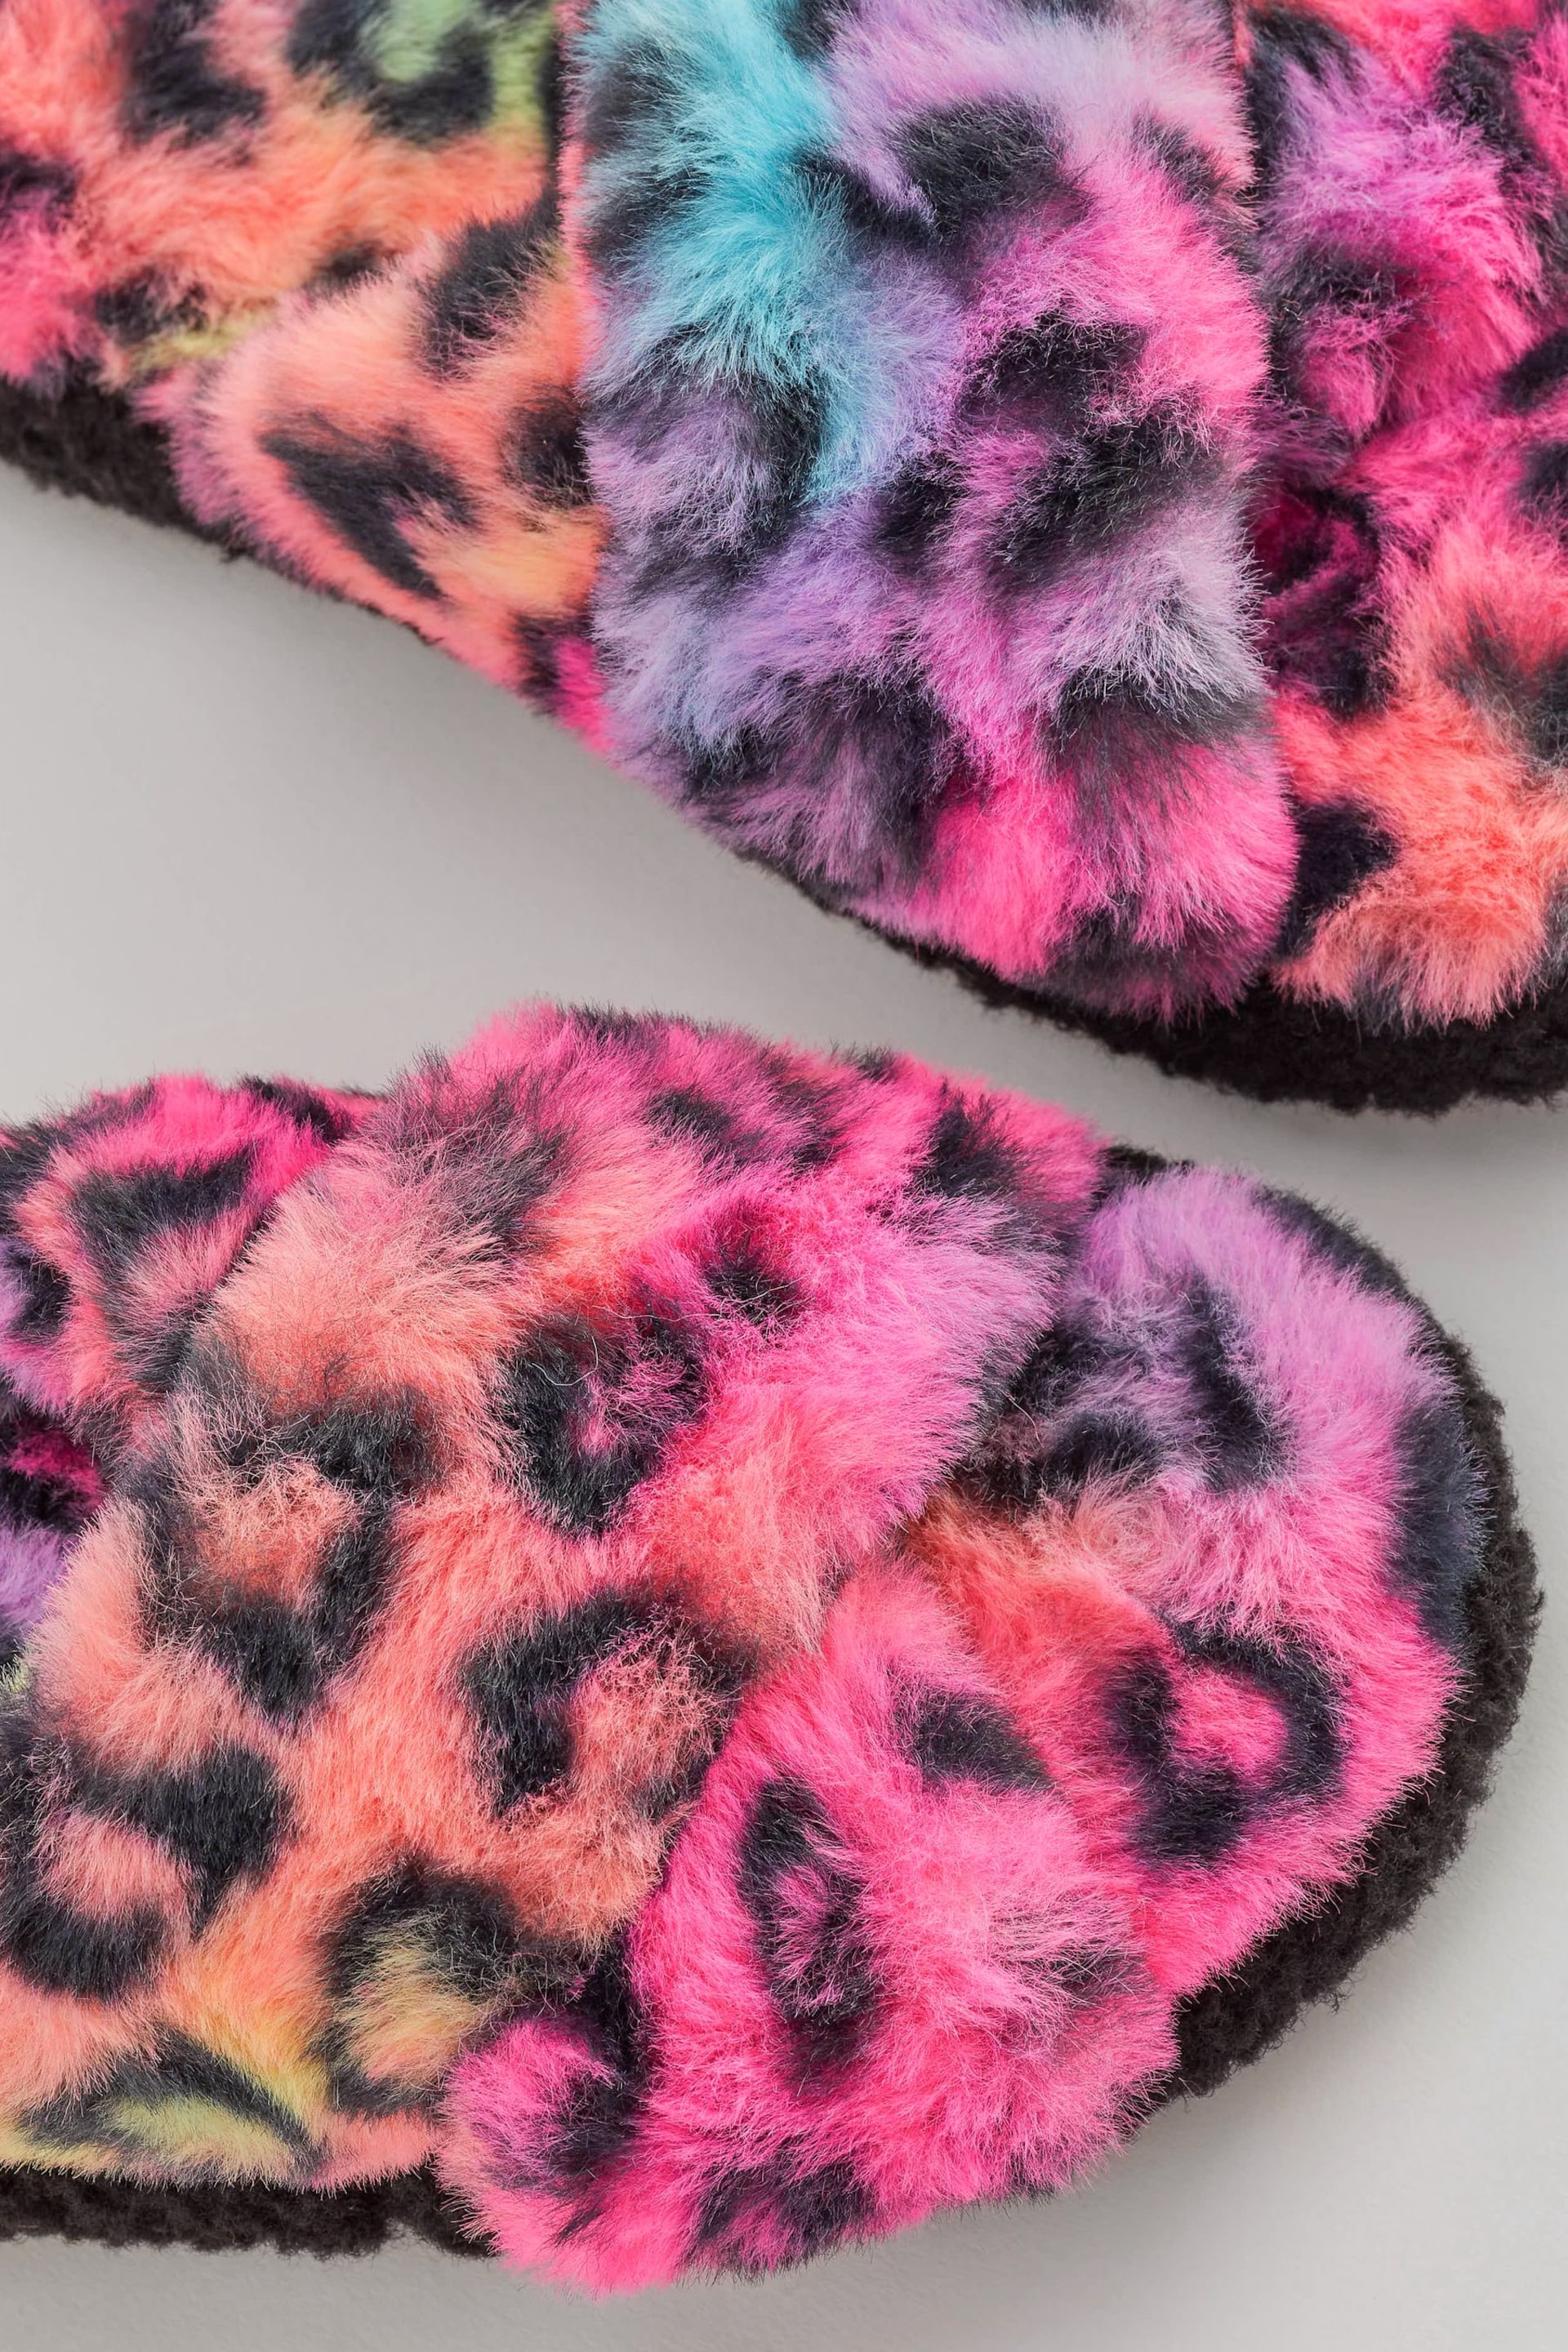 Bright Animal Print Faux Fur Slider Slippers - Image 8 of 9